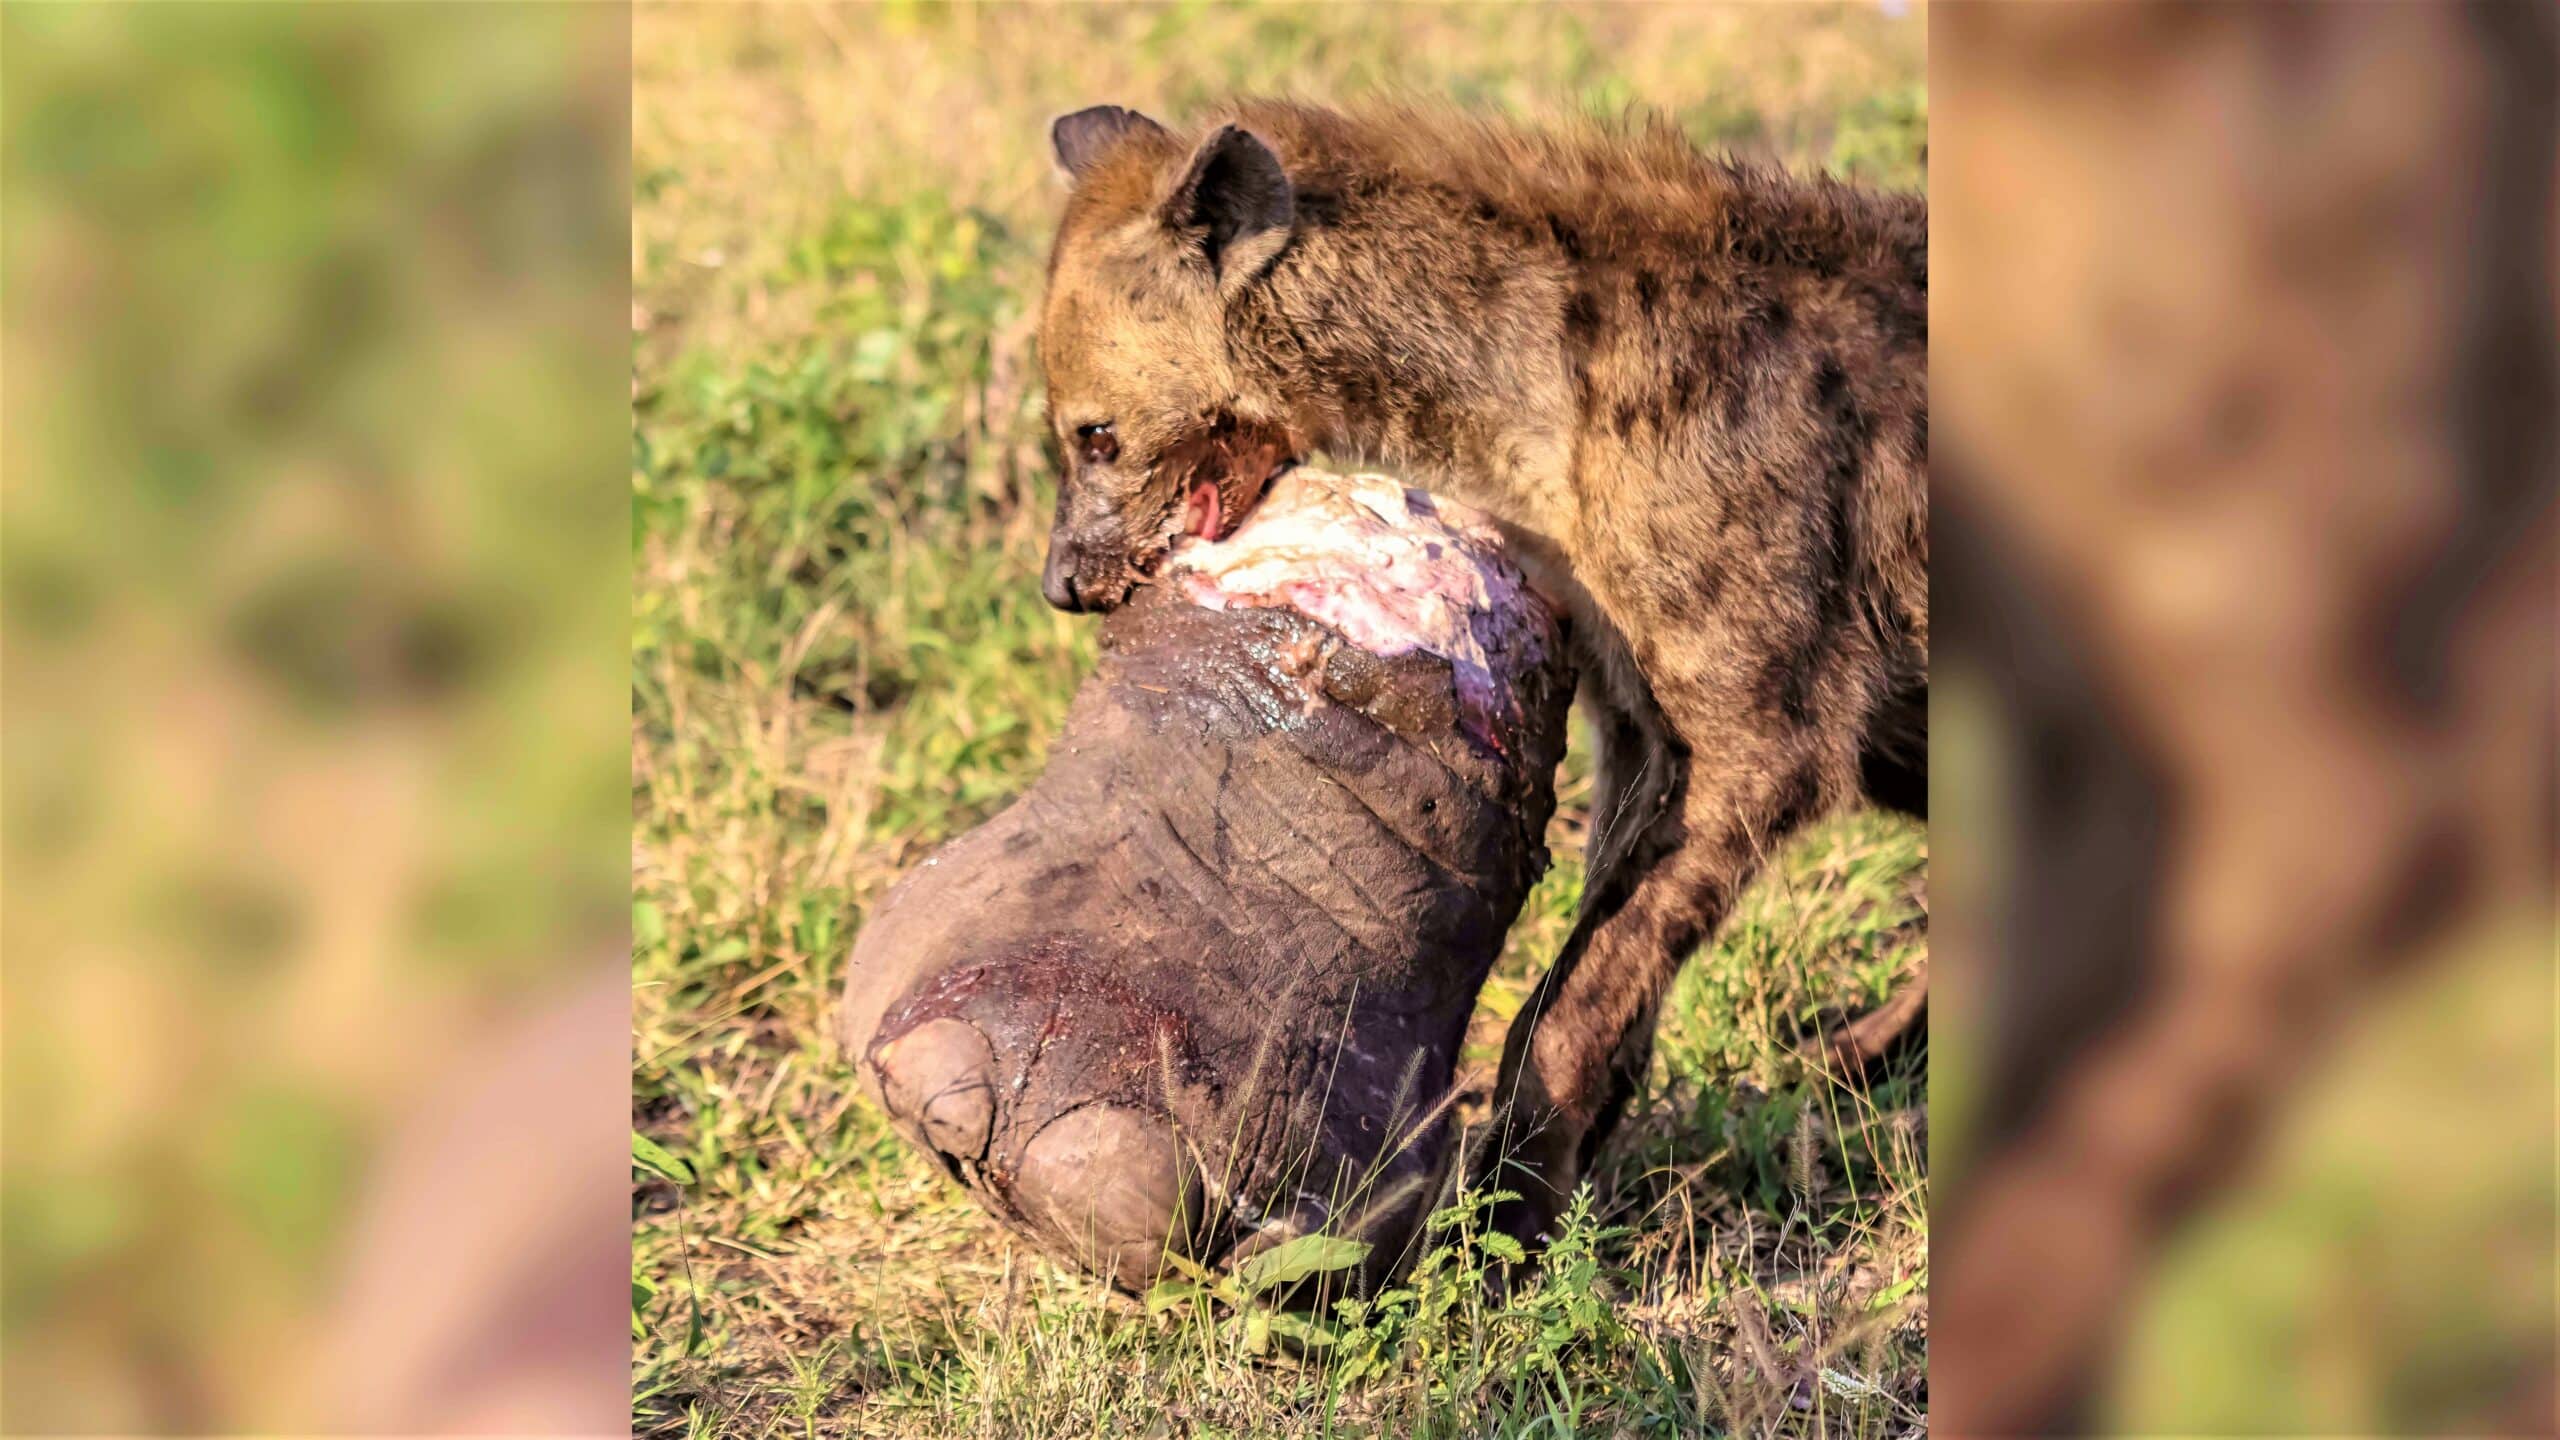 Hyena Gets Away With Elephant's Giant Foot